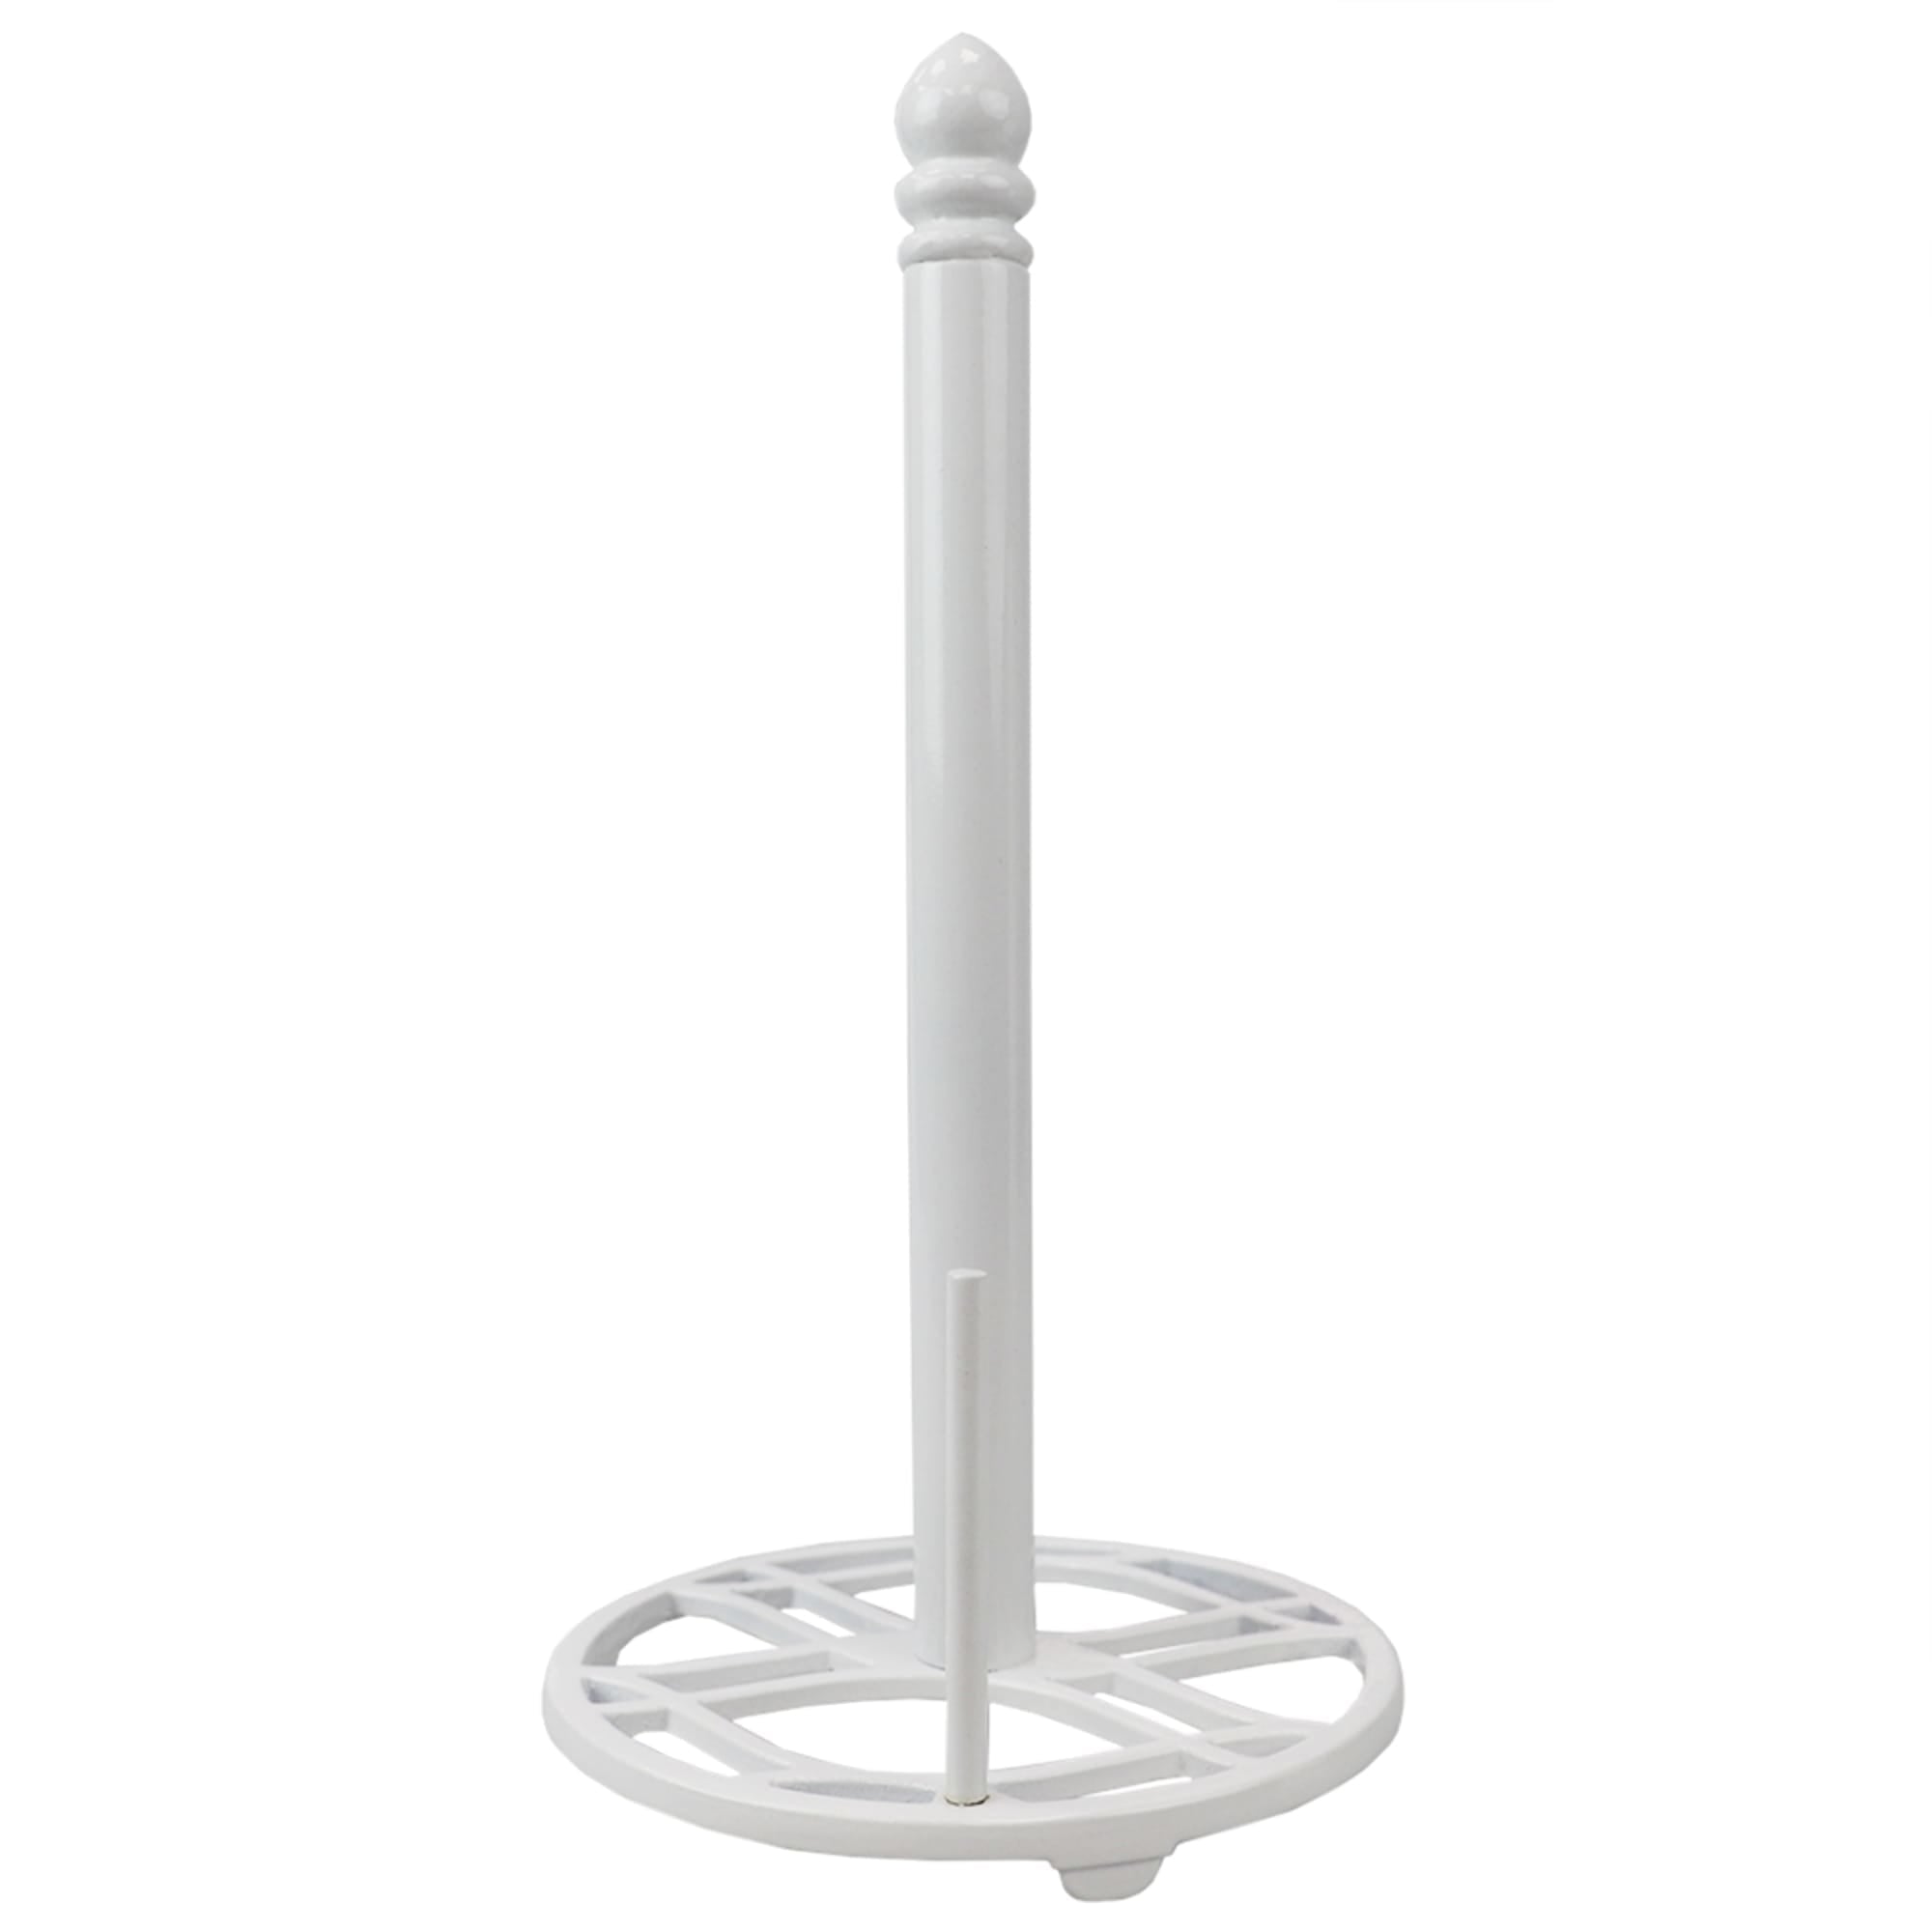 Home Basics Iris Freestanding Cast Iron Paper Towel Holder with Tear Bar, White $8.00 EACH, CASE PACK OF 3